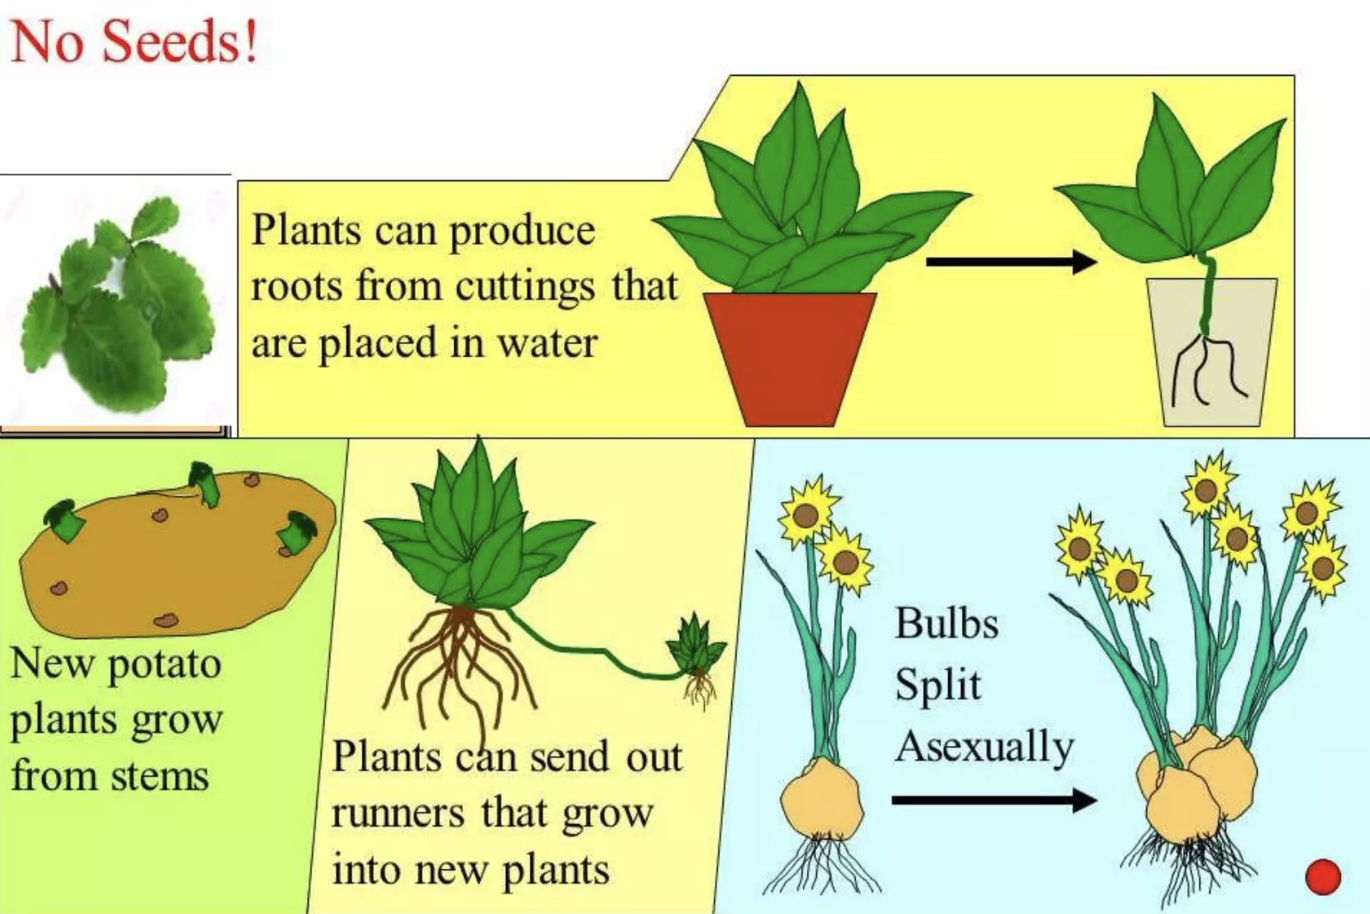 <ul><li><p>only one parent is needed, and the copies that are made are genetically identical.</p></li><li><p>Plant cuttings can be used to <strong>propagate</strong> plants, and is called <strong>vegetative propagation</strong>.</p></li></ul><p>In grafting, one plant can be combined with another.</p><ul><li><p>a part of a plant is attached to another plant (with its own root system).</p></li><li><p>A new plant grows as a combination of the two - the introduced plant part can now use the root system of the other plant.</p></li></ul>